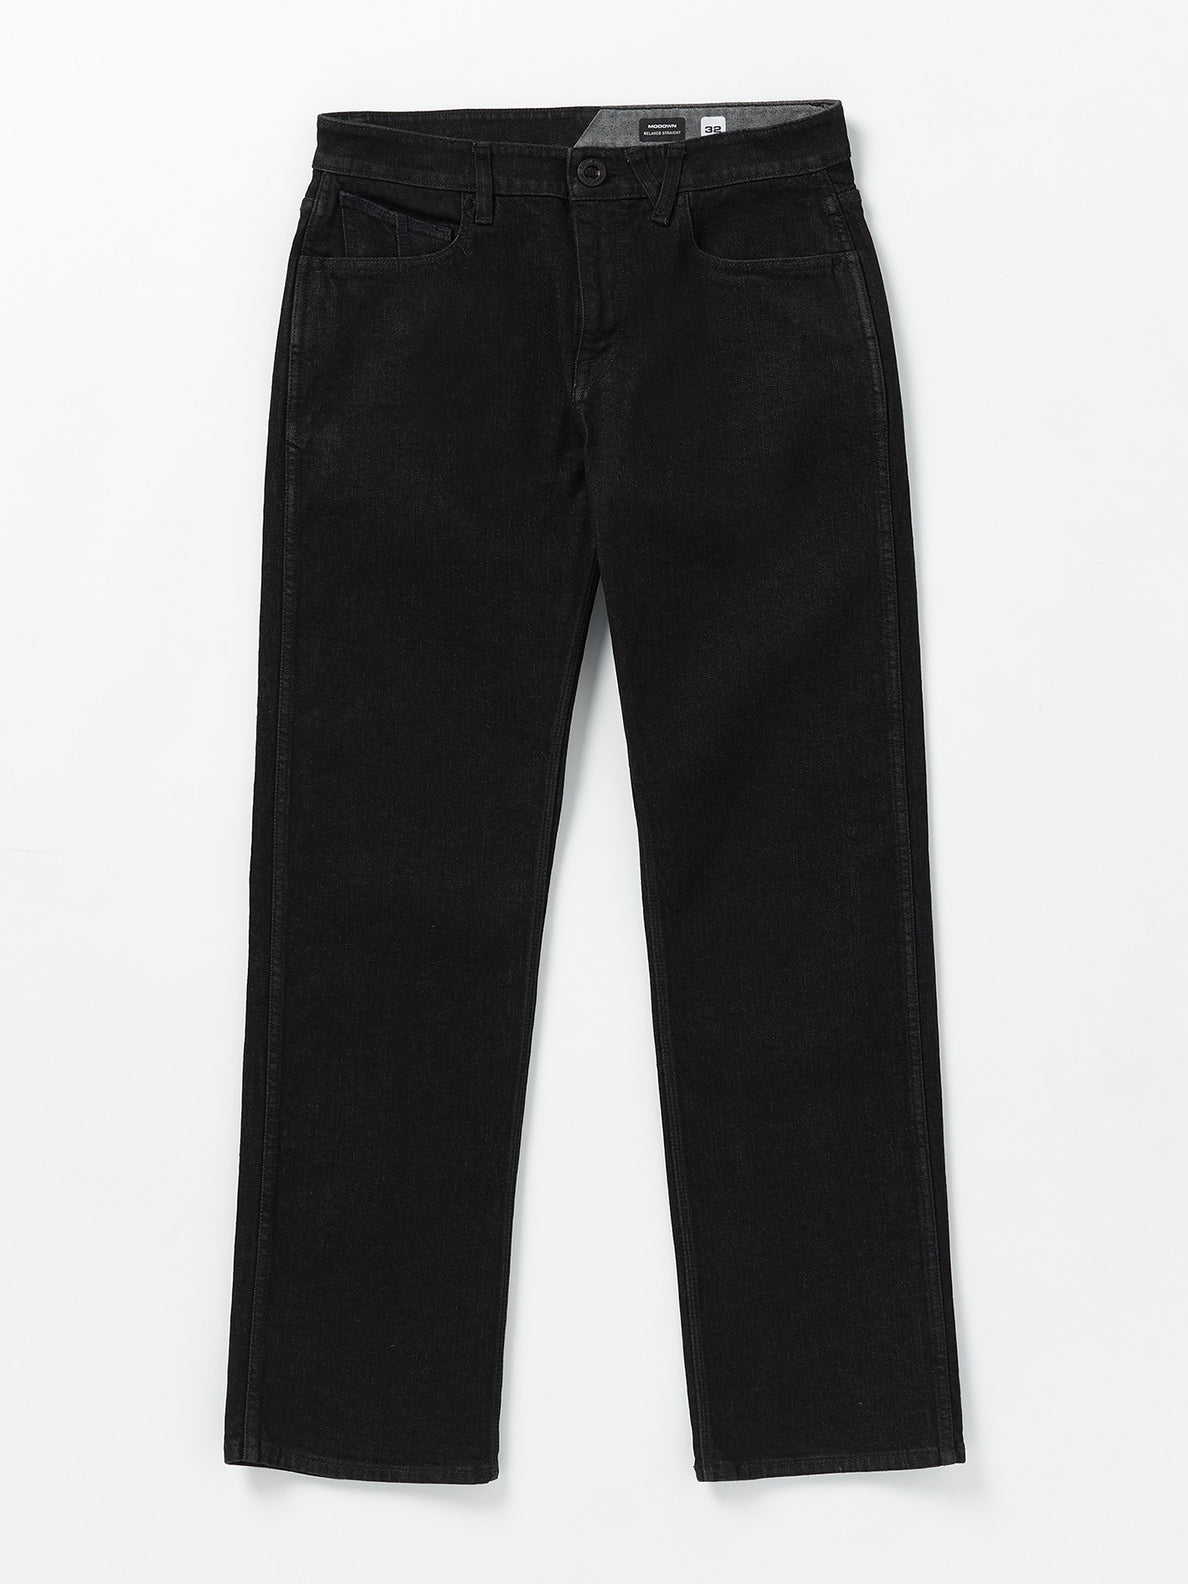 Modown Relaxed Fit Jeans - Black Rinser